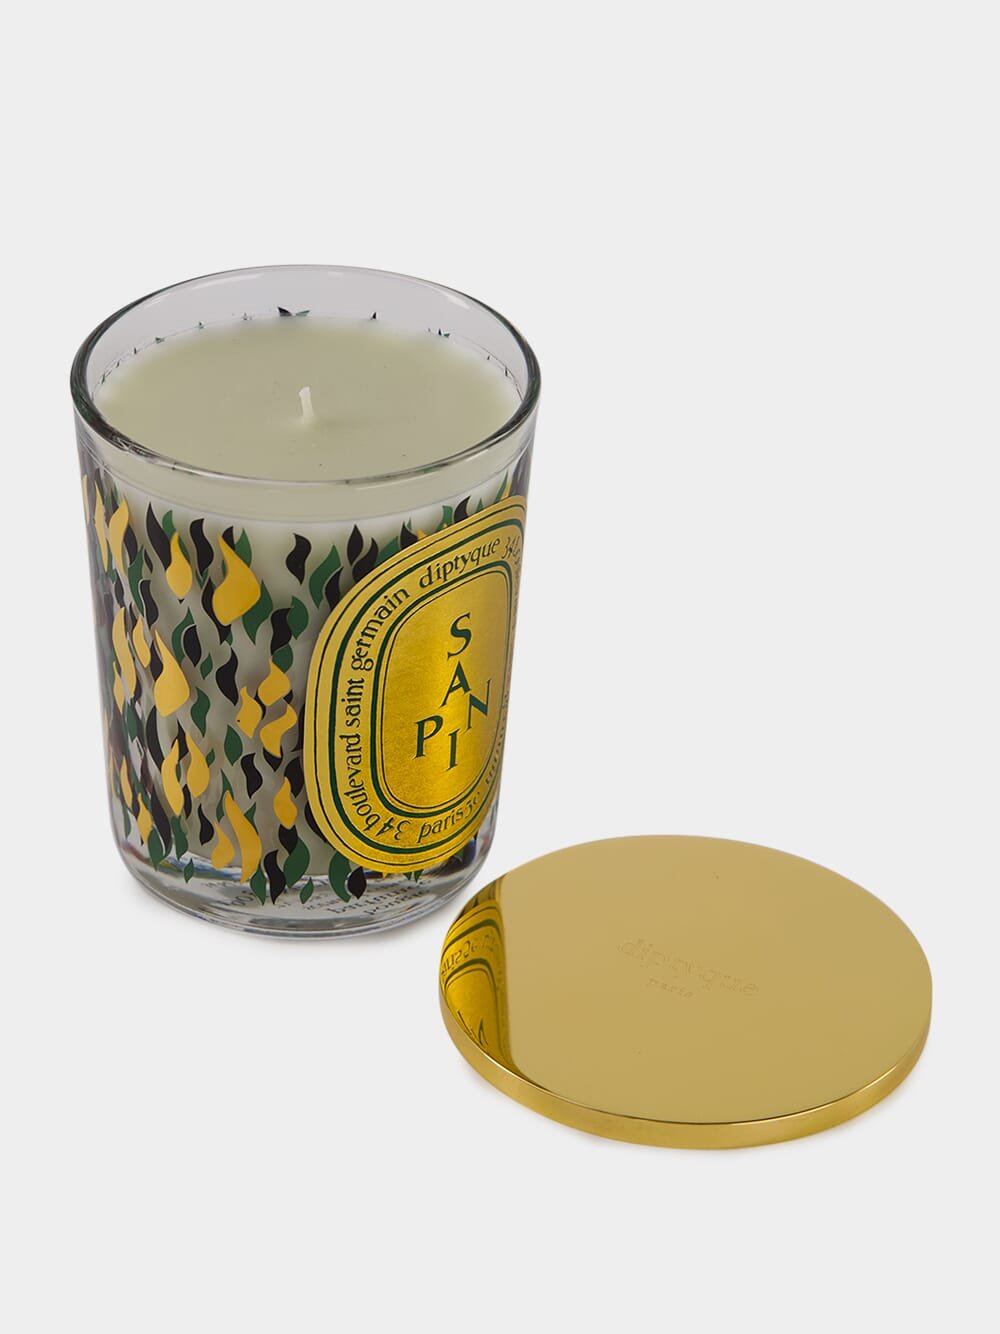 DiptyqueSapin Classic Candle 190g at Fashion Clinic